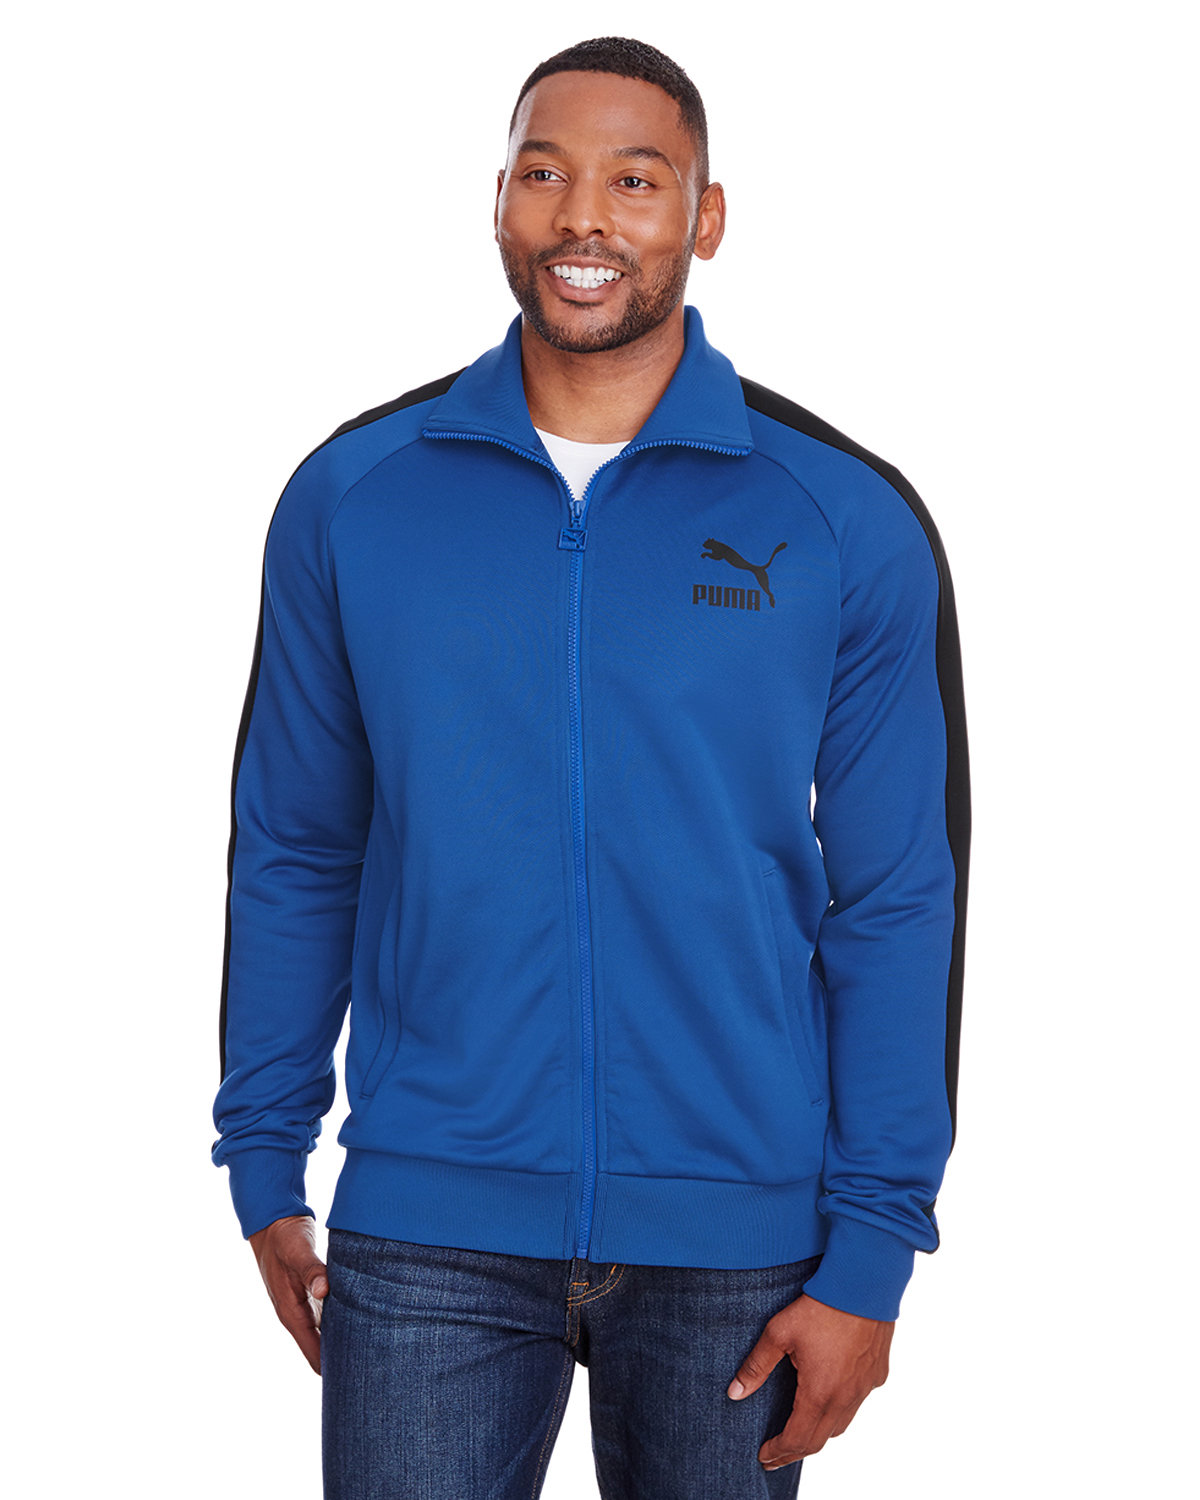 Buy Adult Iconic T7 Track Jacket - Puma Sport Online at Best price - CA